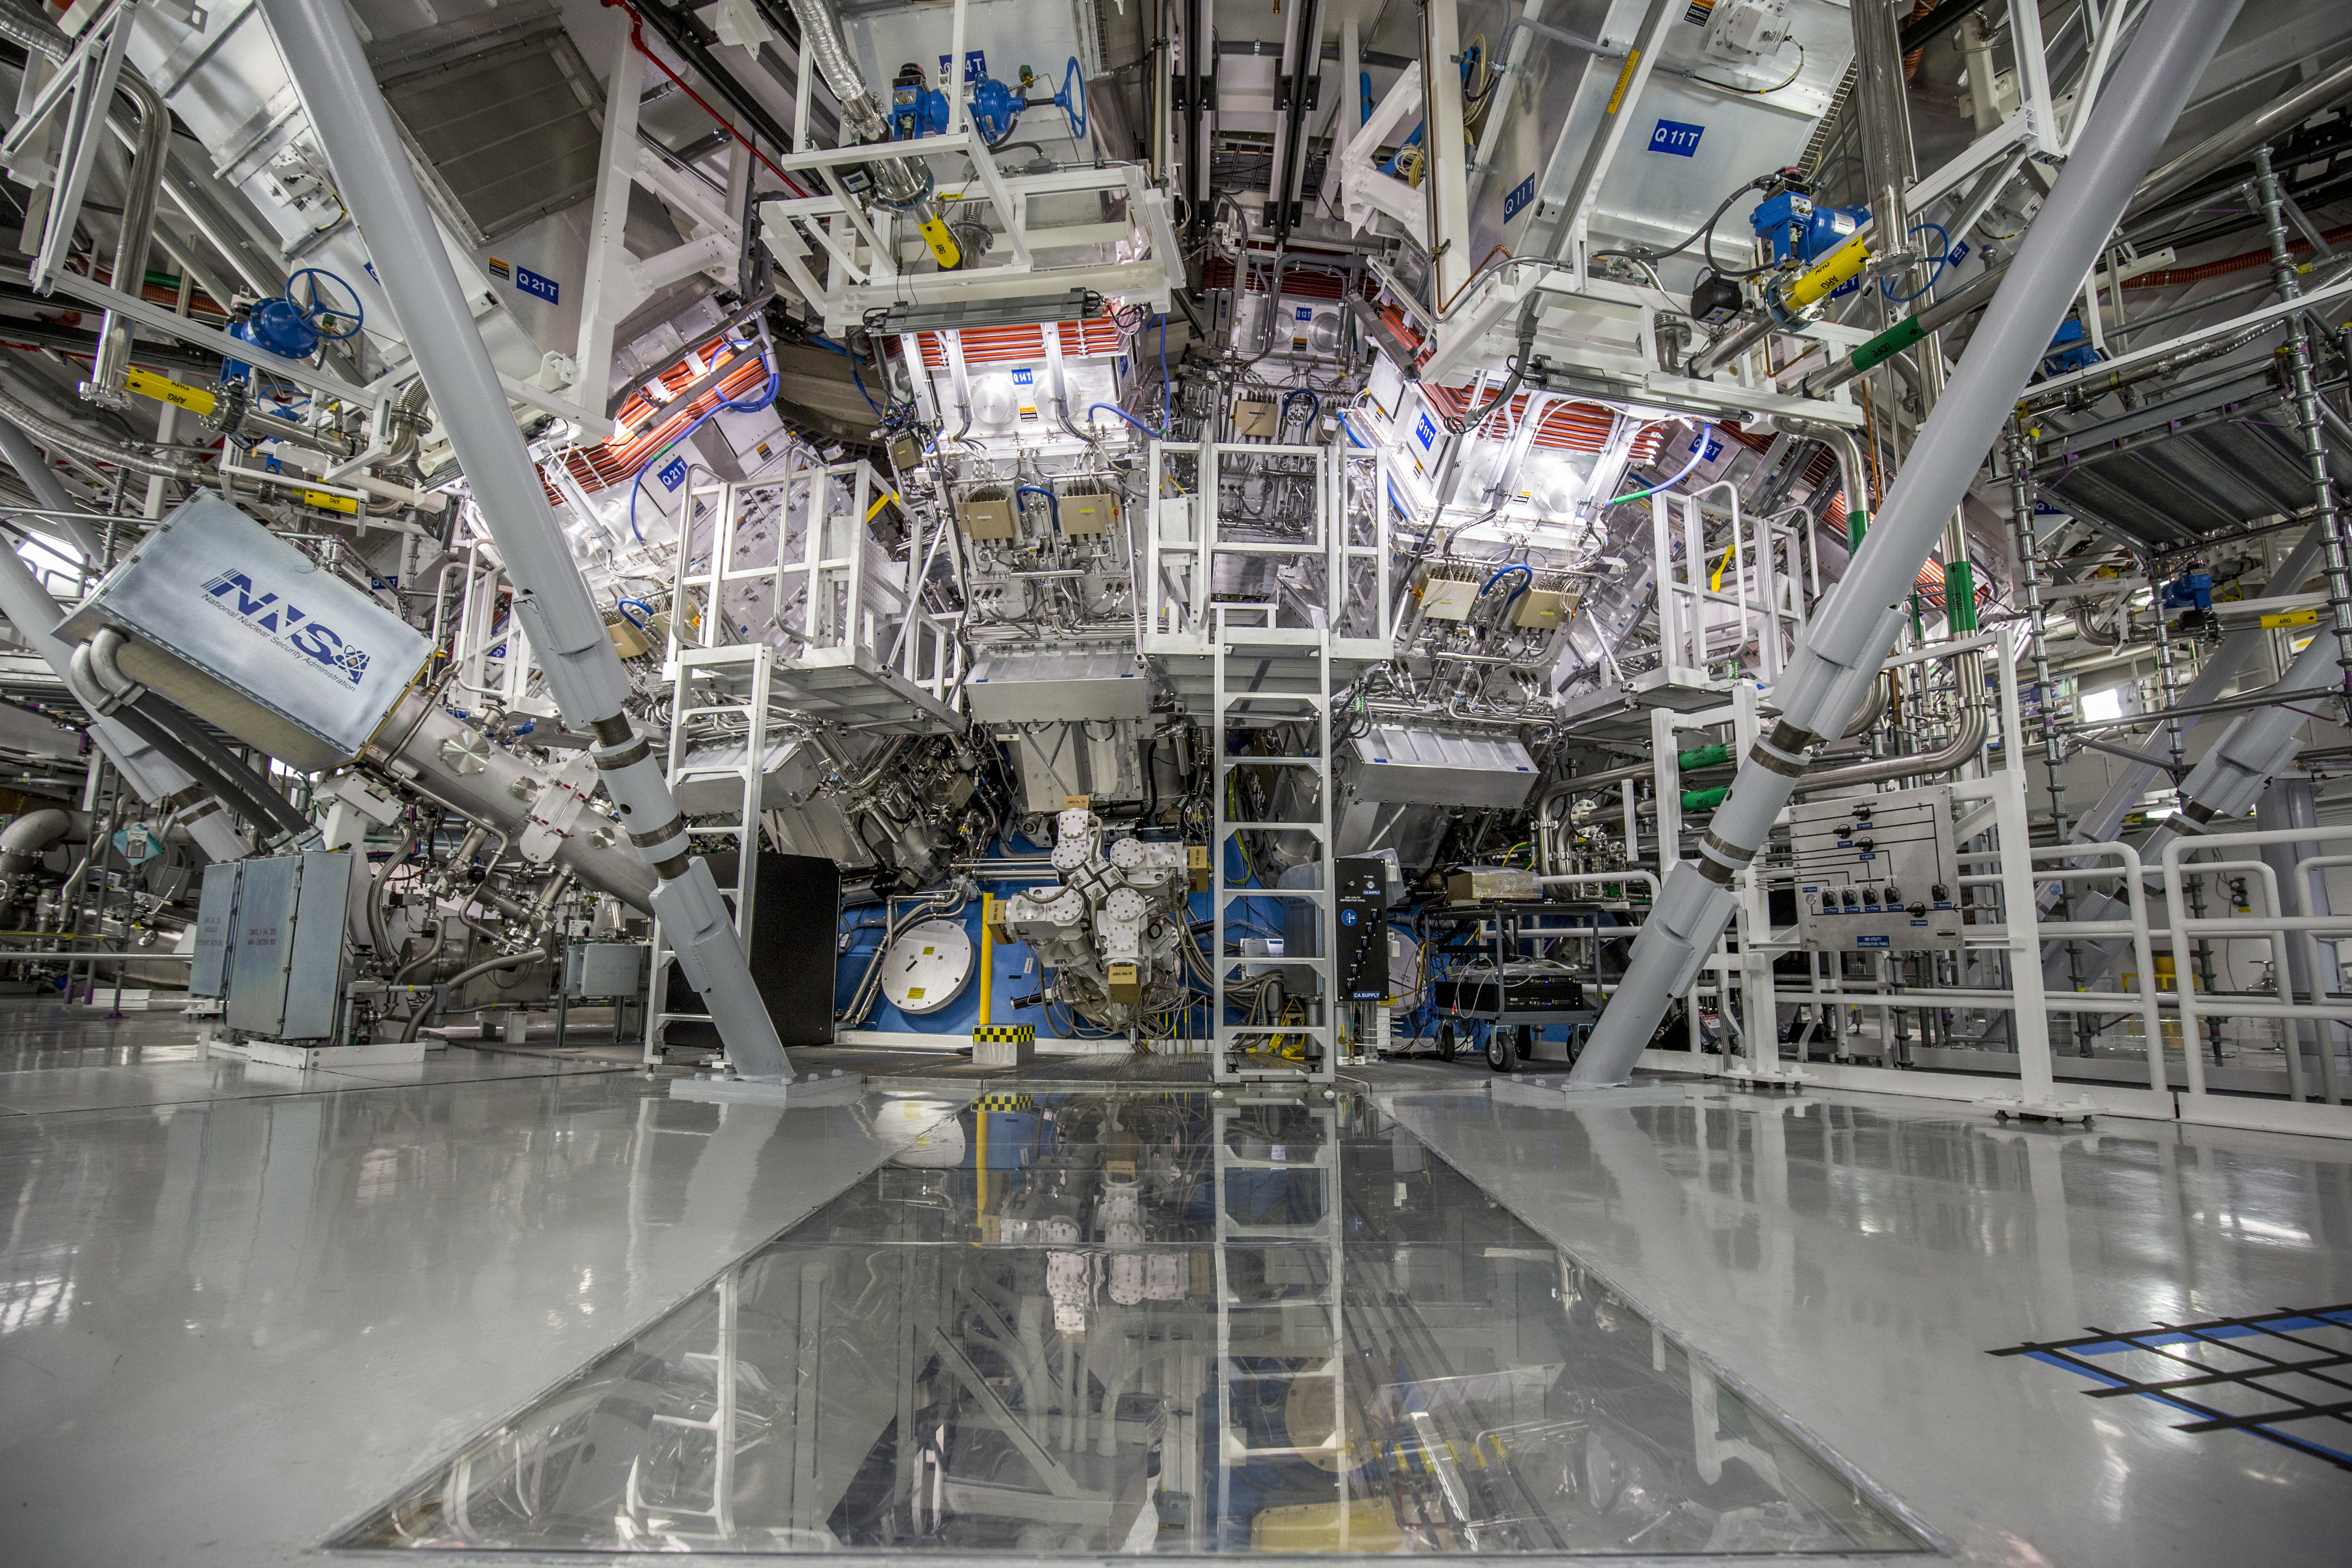 The target chamber of LLNL’s National Ignition Facility